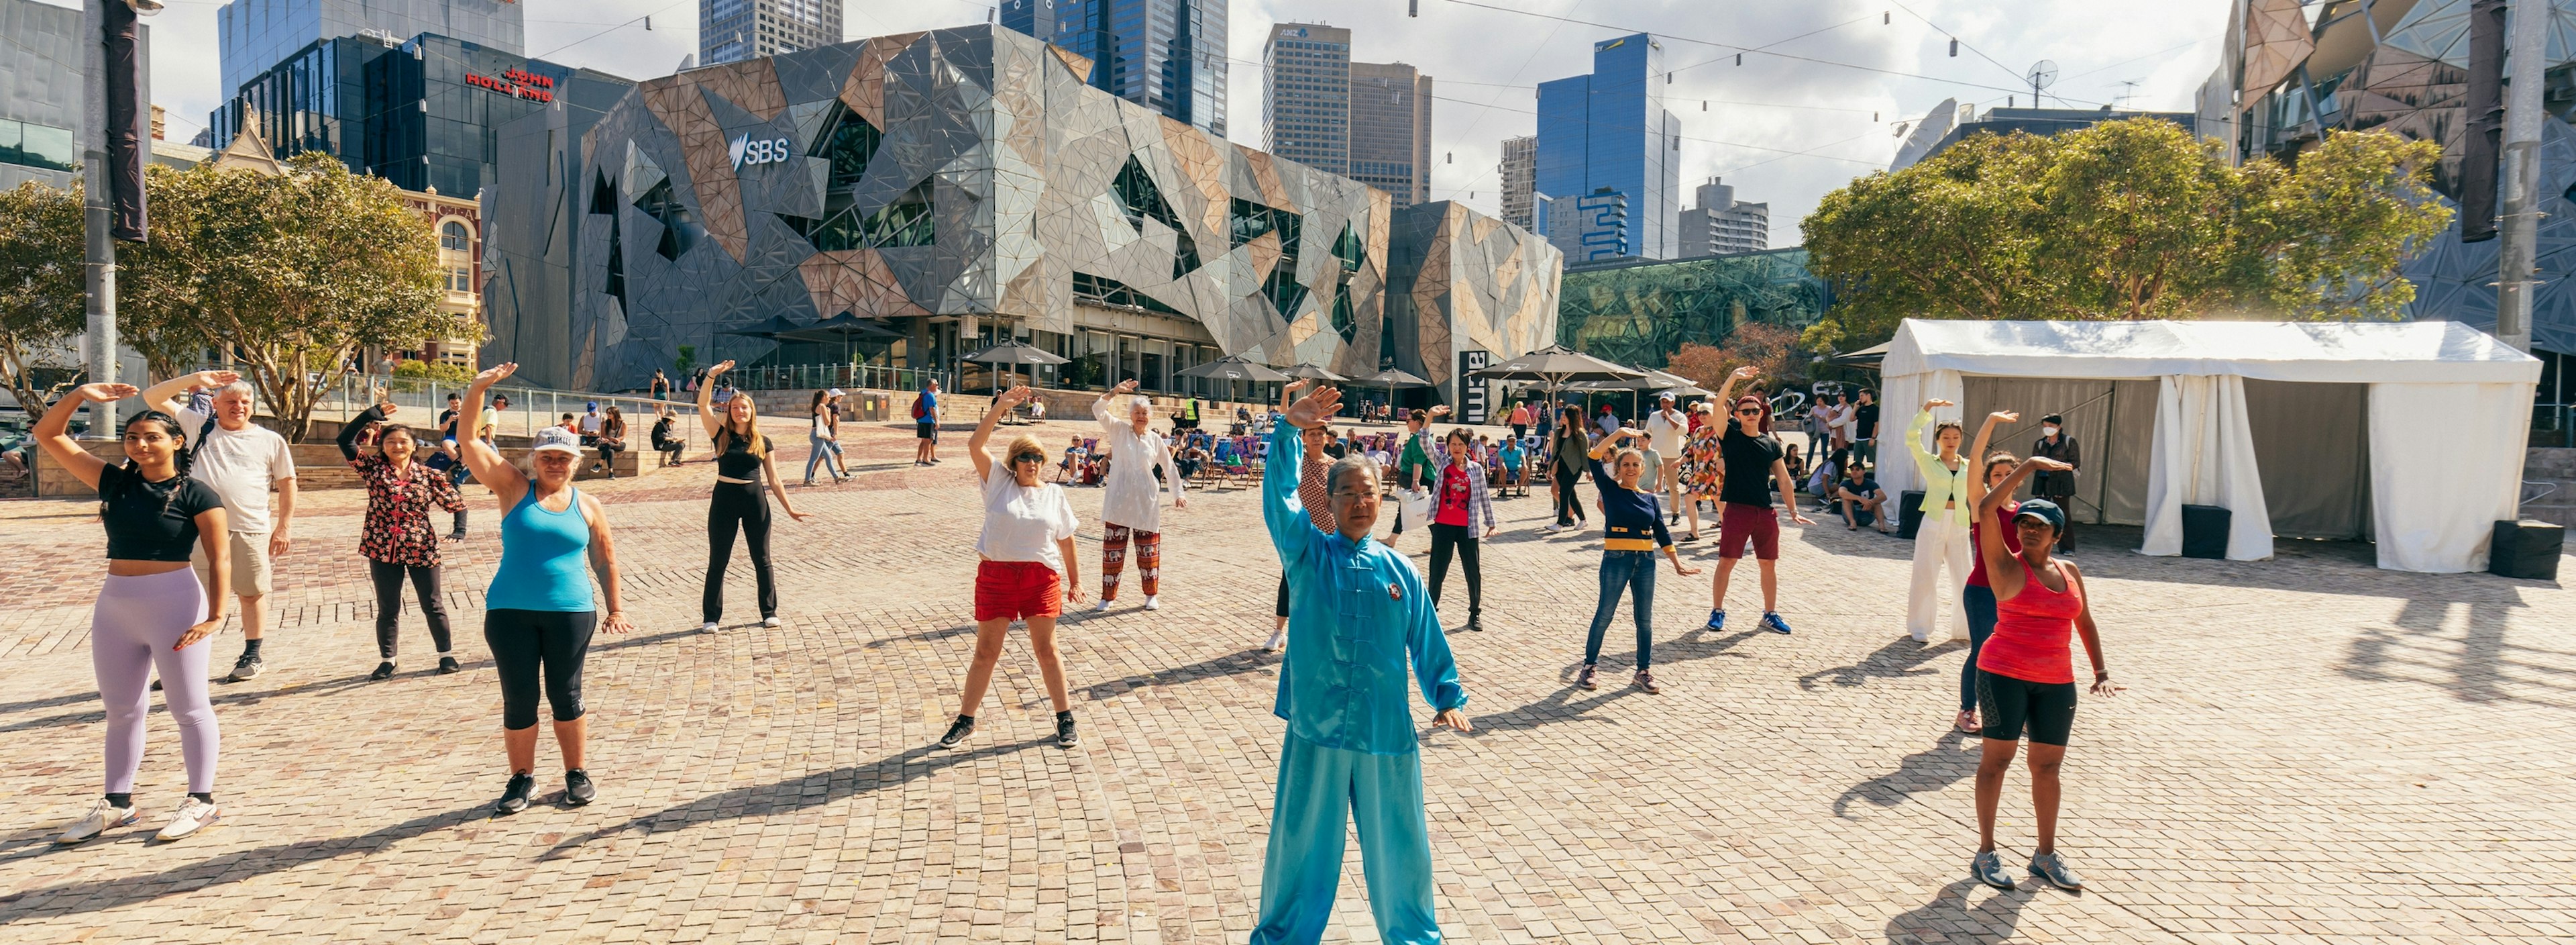 Many people enjoy Tai Chi at Fed Square, led by Master Song, in blue silks.